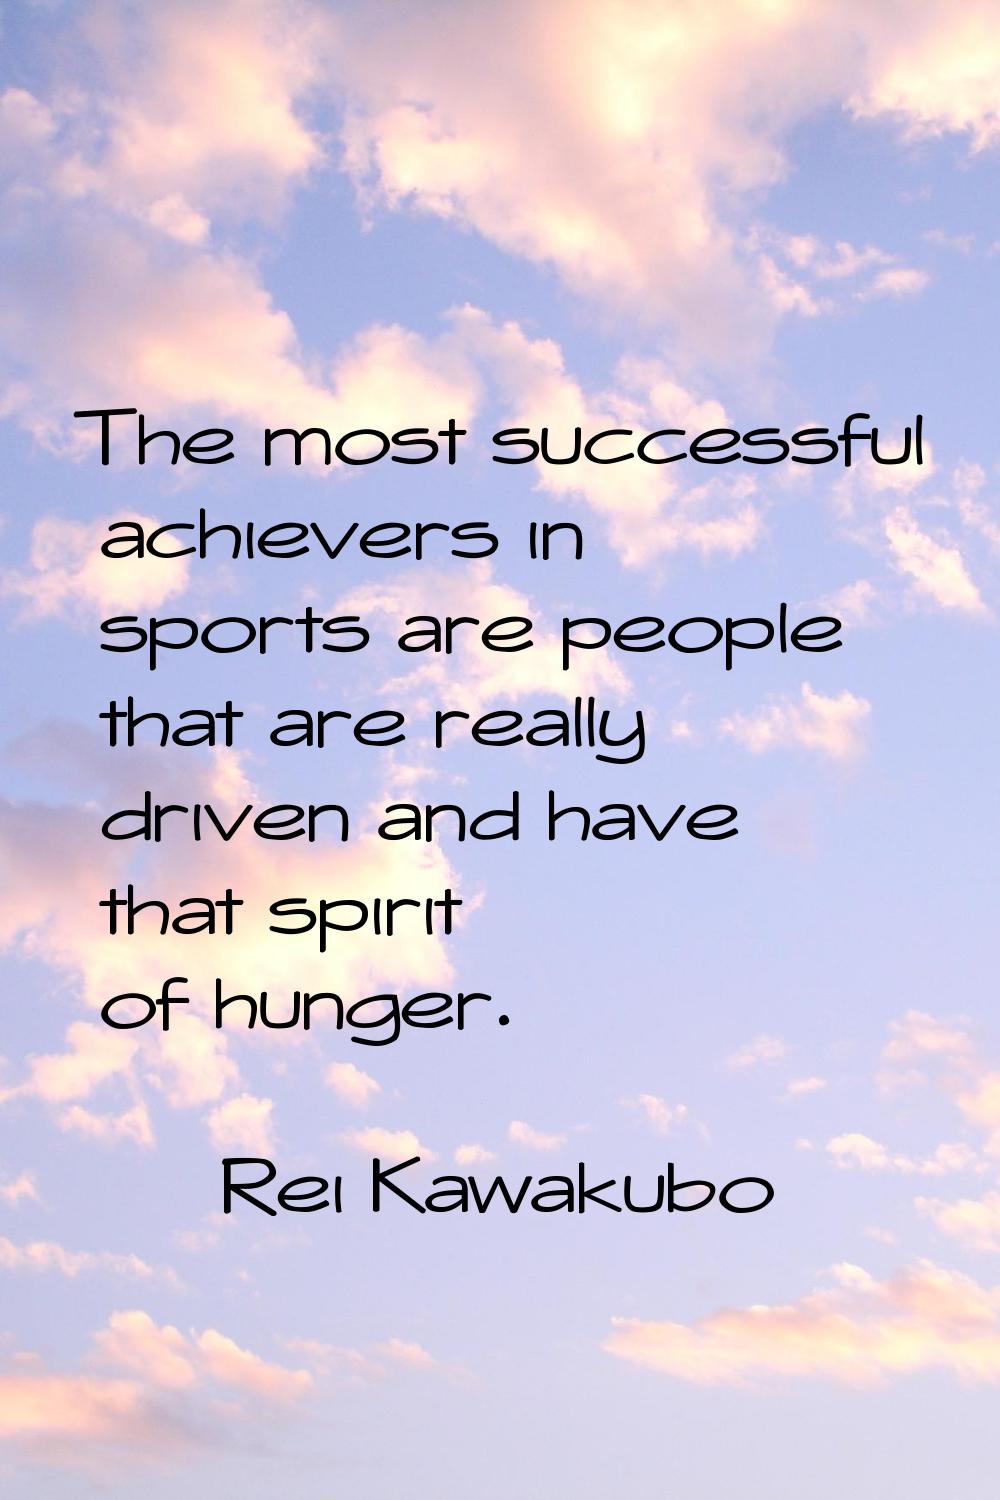 The most successful achievers in sports are people that are really driven and have that spirit of h